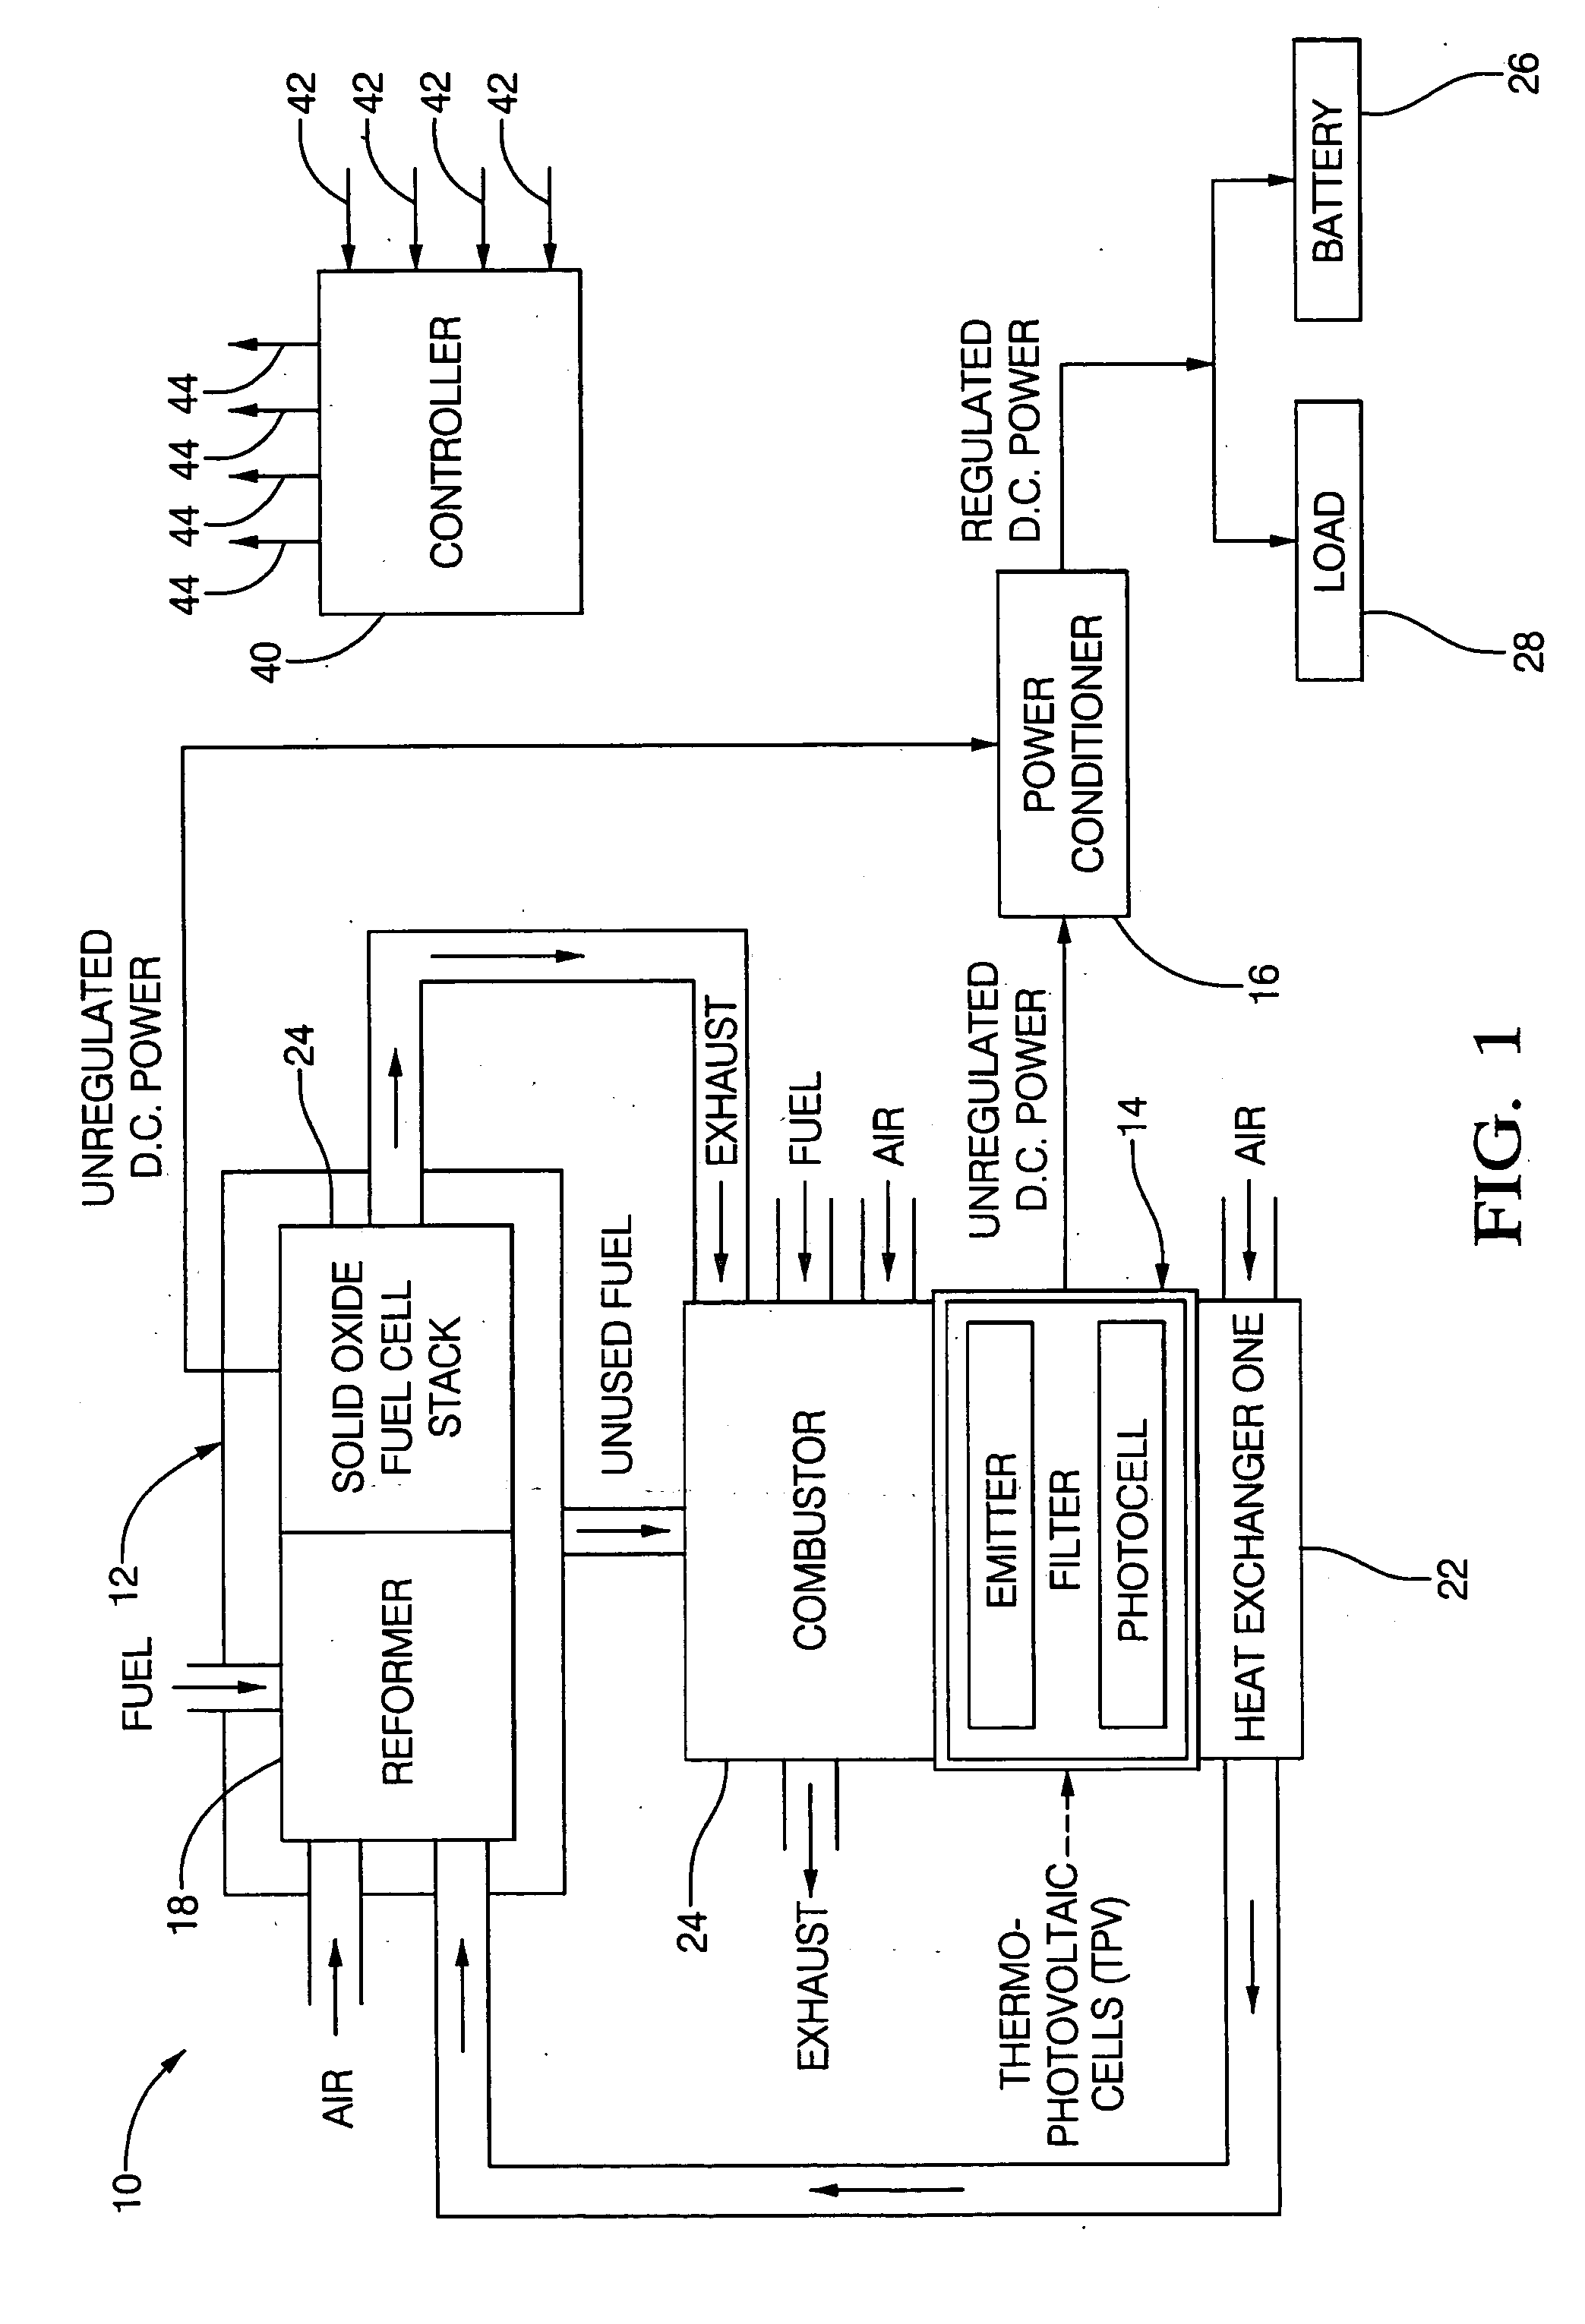 Apparatus and method for solid oxide fuel cell and thermo photovoltaic converter based power generation system